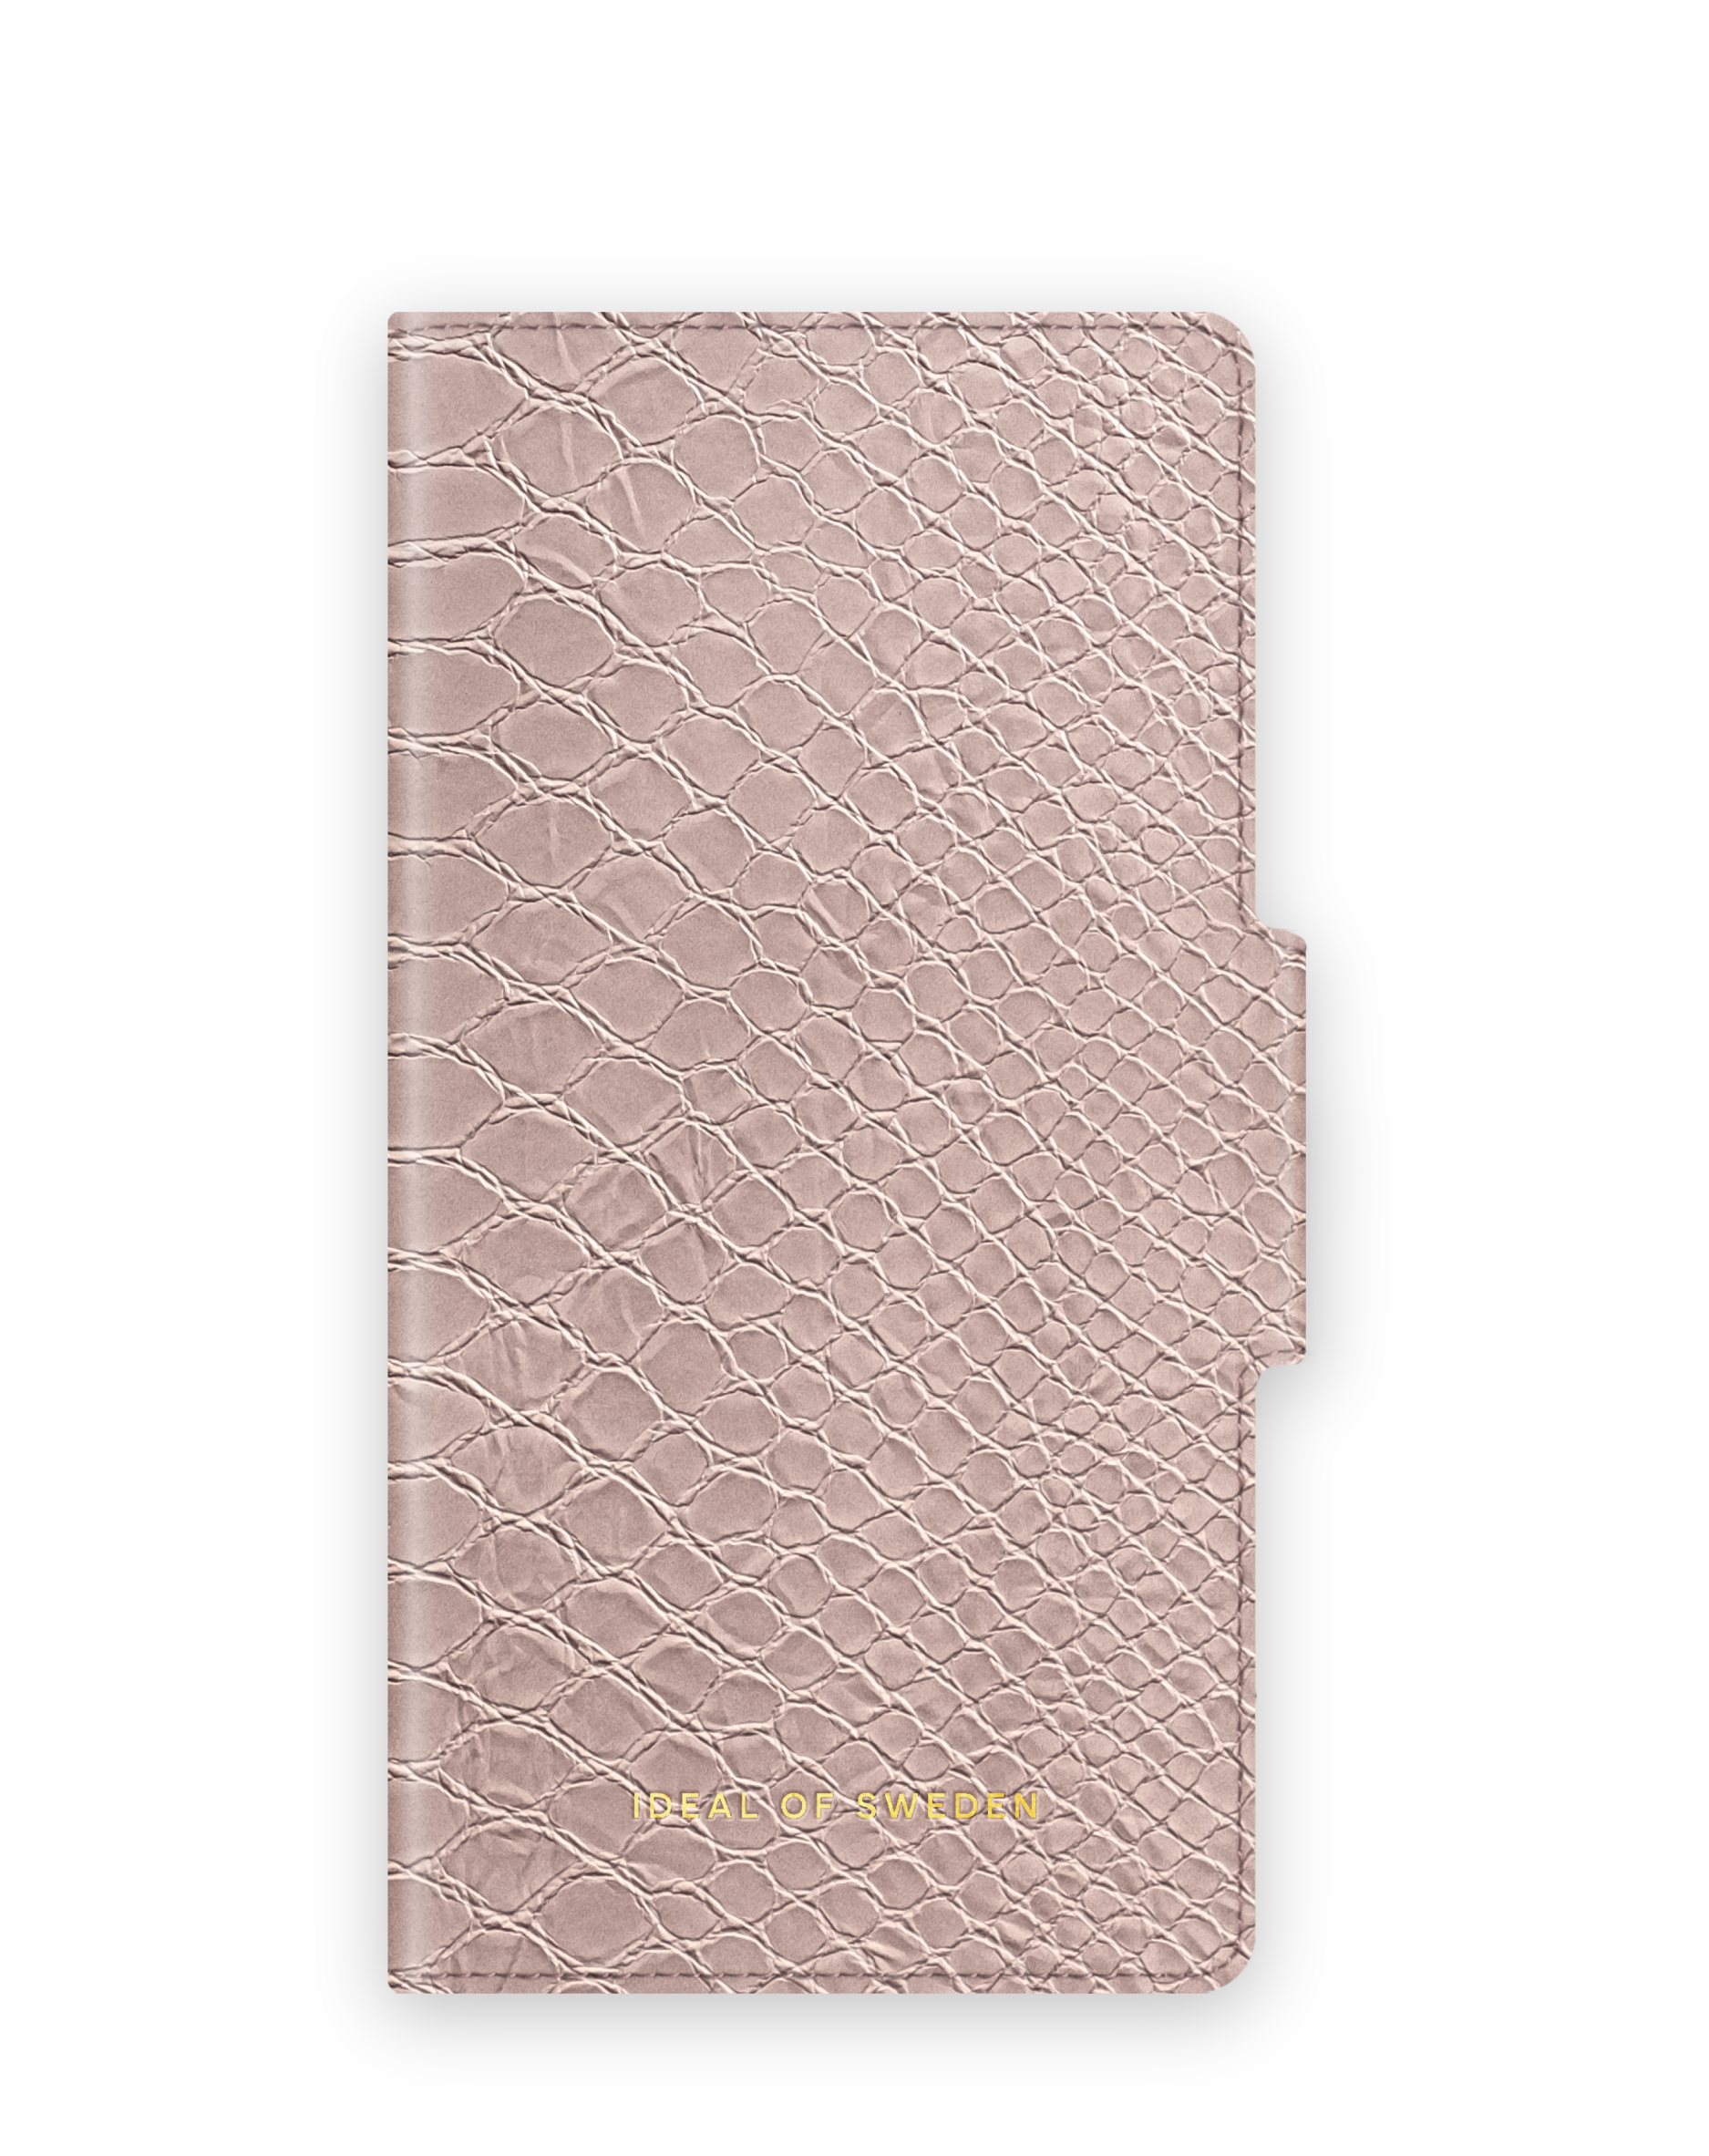 IDEAL OF Lotus SWEDEN IDAW-I2054-234, mini, Apple, 12 Snake Bookcover, IPhone